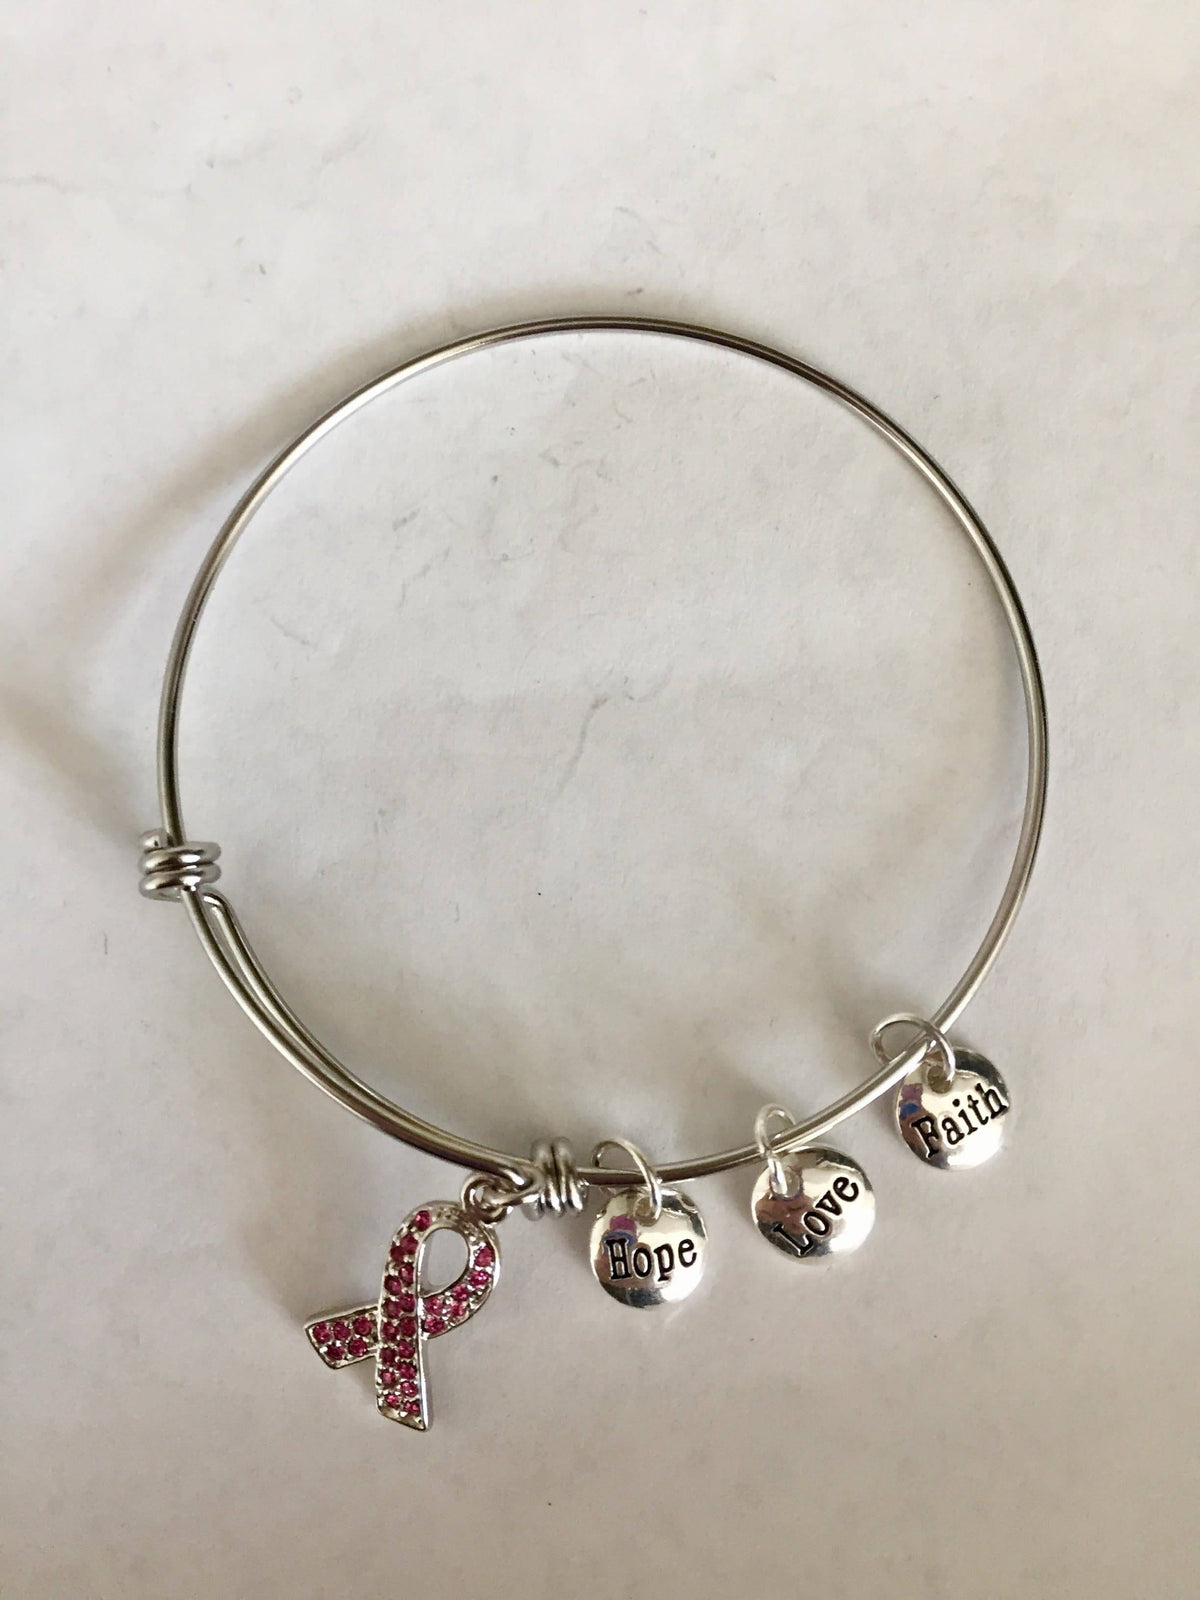 Breast Cancer Awareness Pink Ribbon Charm Bracelet - The House of Awareness